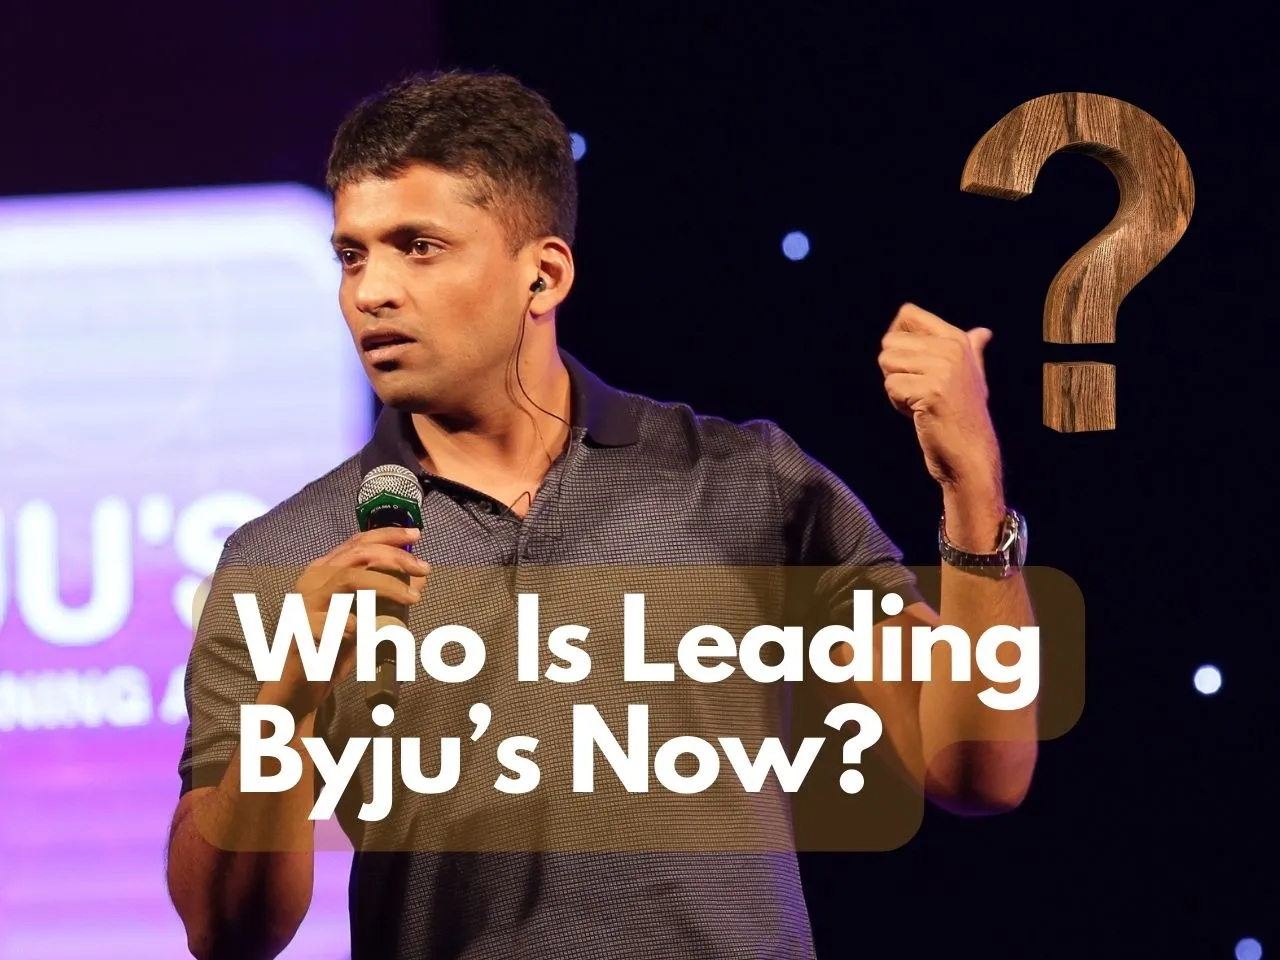 Arjun Mohan Replaces Mrinal Mohit as CEO of BYJU’S India Operations